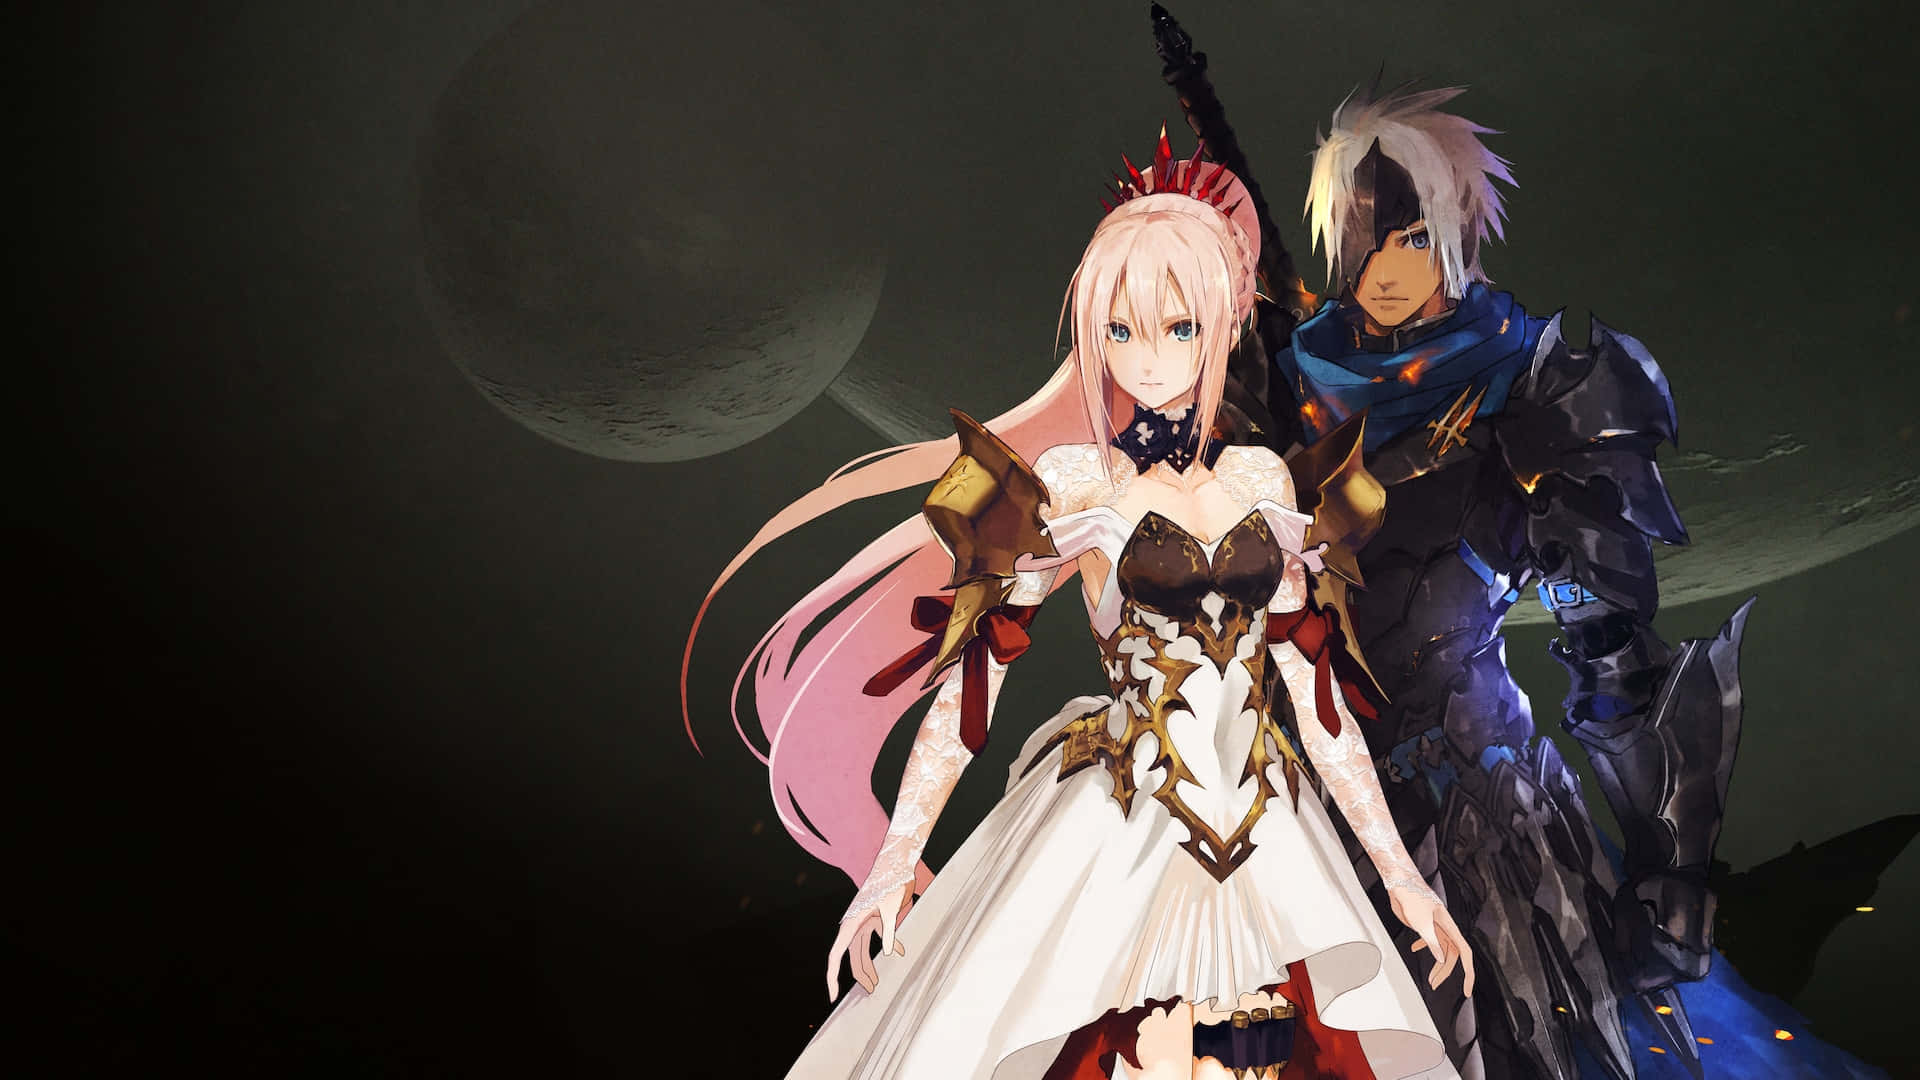 Follow your Journey and Unite the Two Worlds in “Tales of Arise” Wallpaper